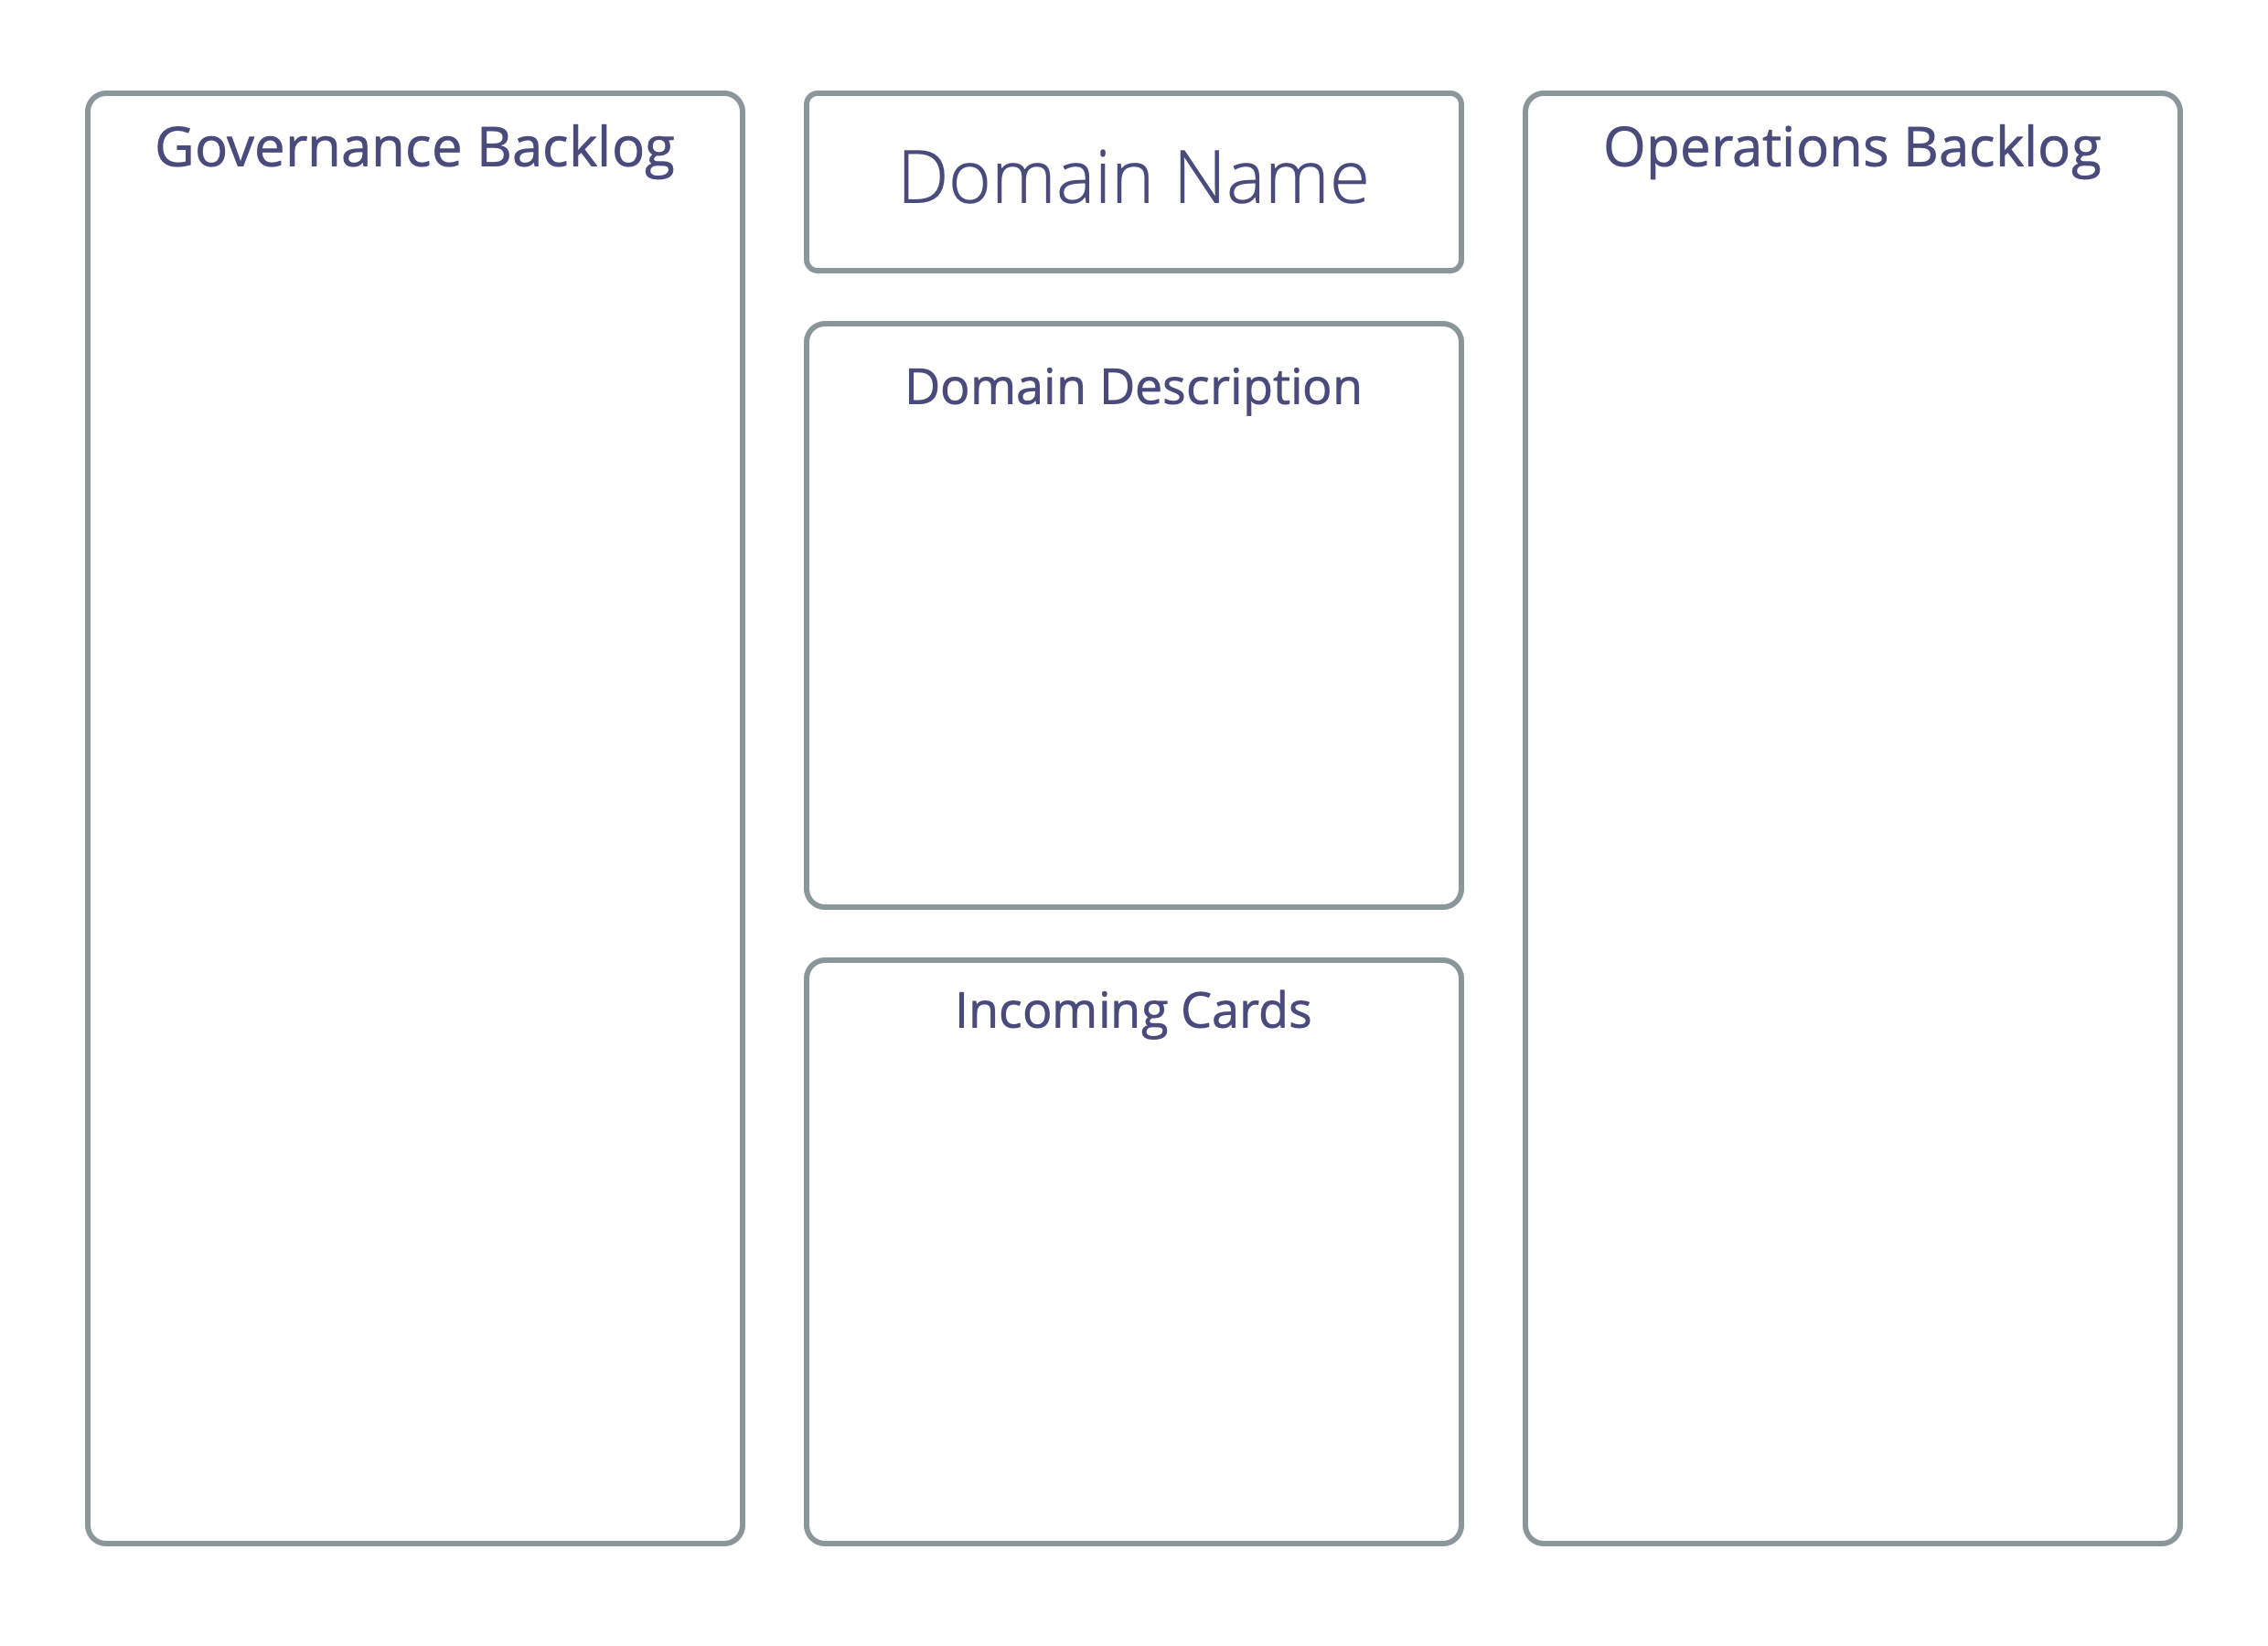 Driver Mapping: A template for domains